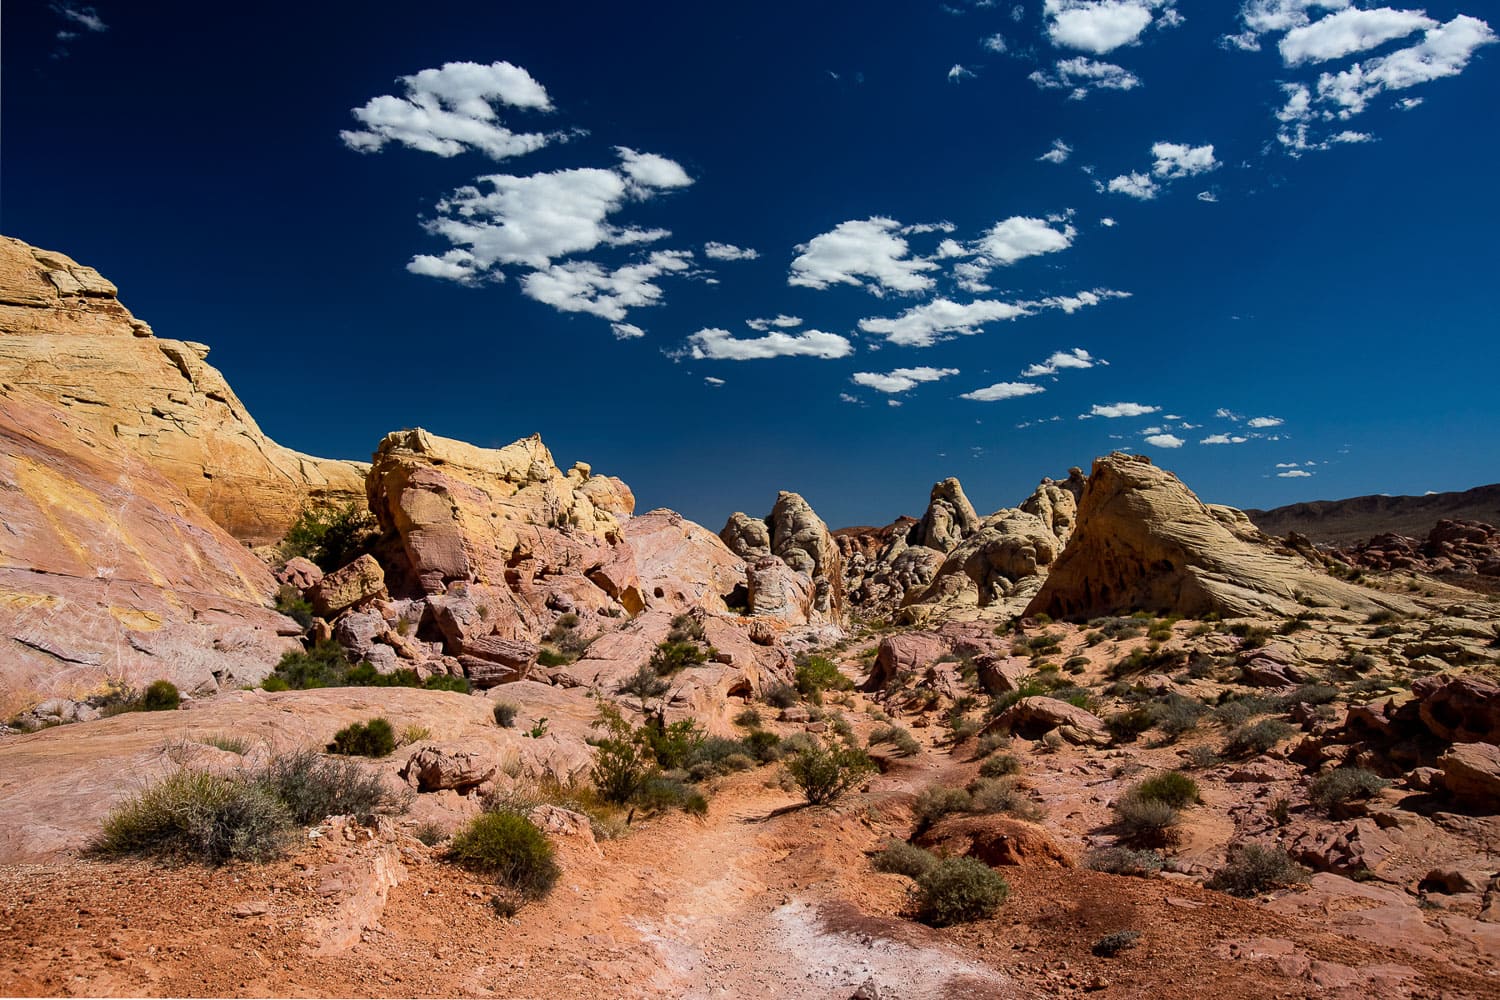 A desert landscape with yellow, pink, white, and orange rocks.